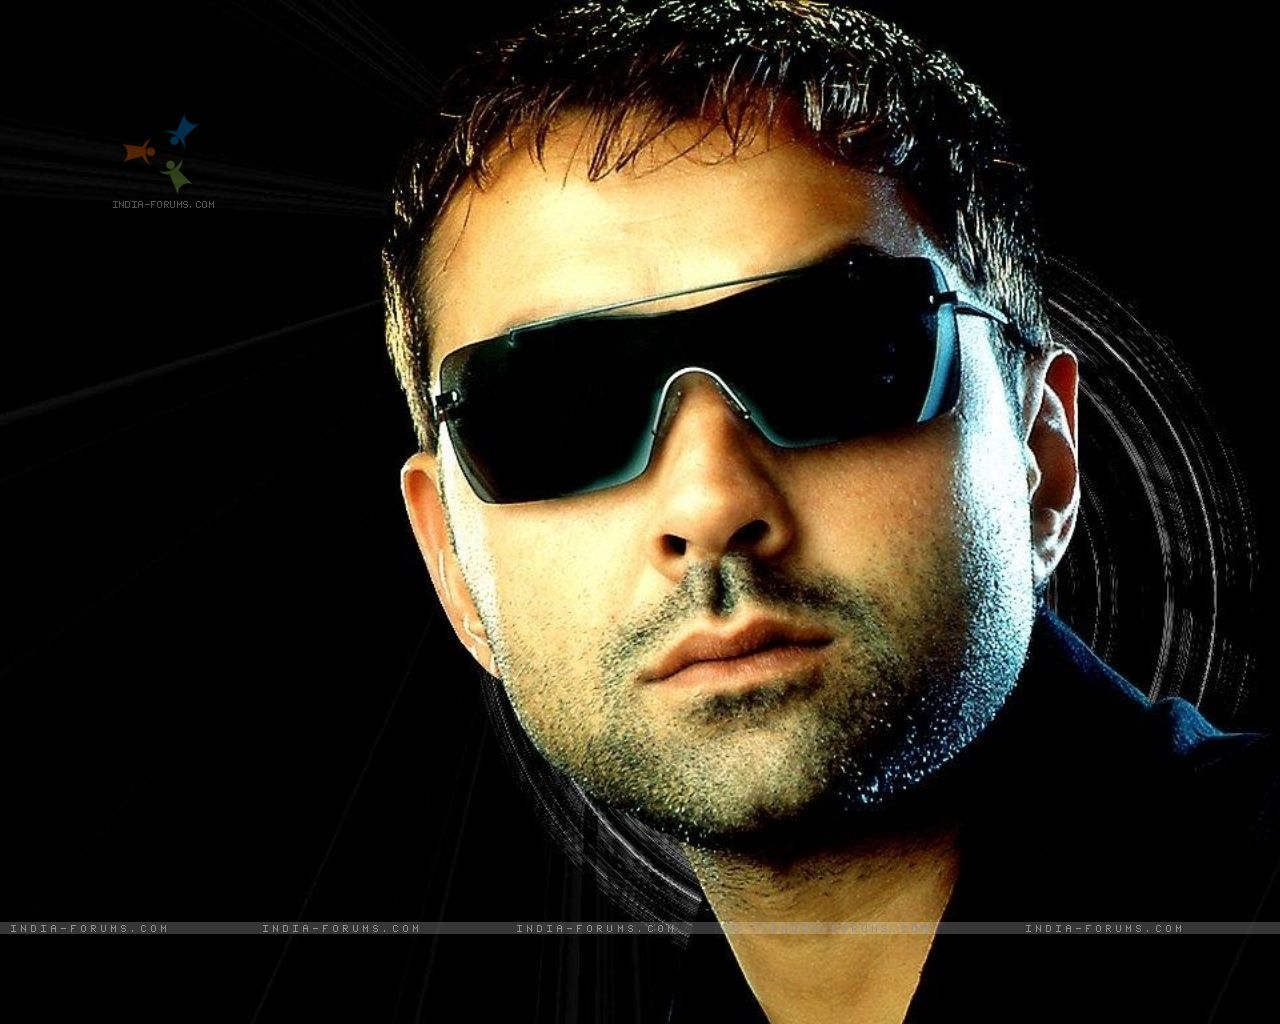 Bobby Deol Wearing Black Goggles